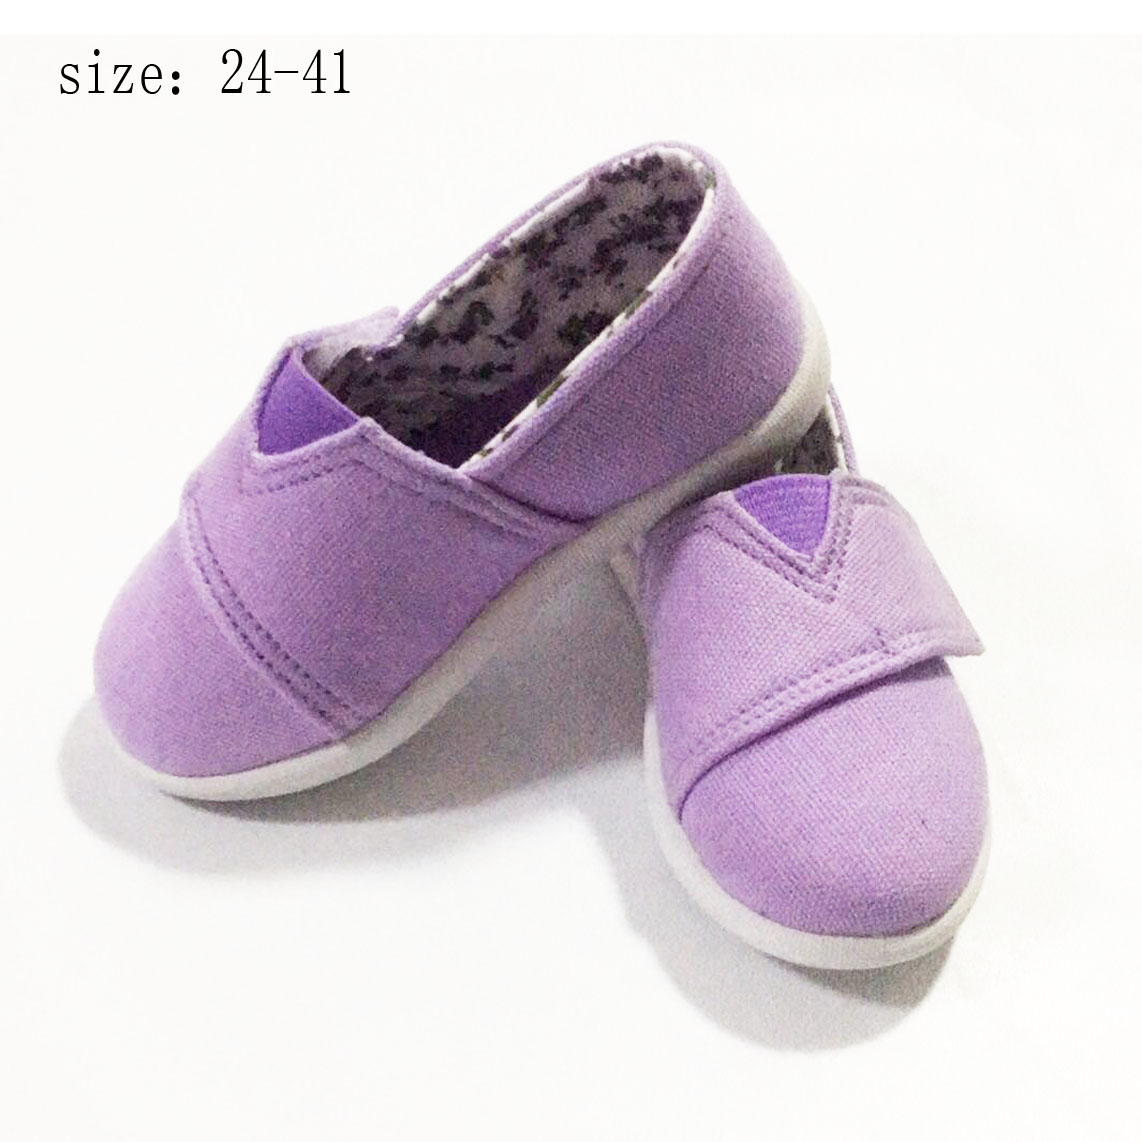 New design women casual shoes canvas shoes (HP19517-2 1. ITEM...